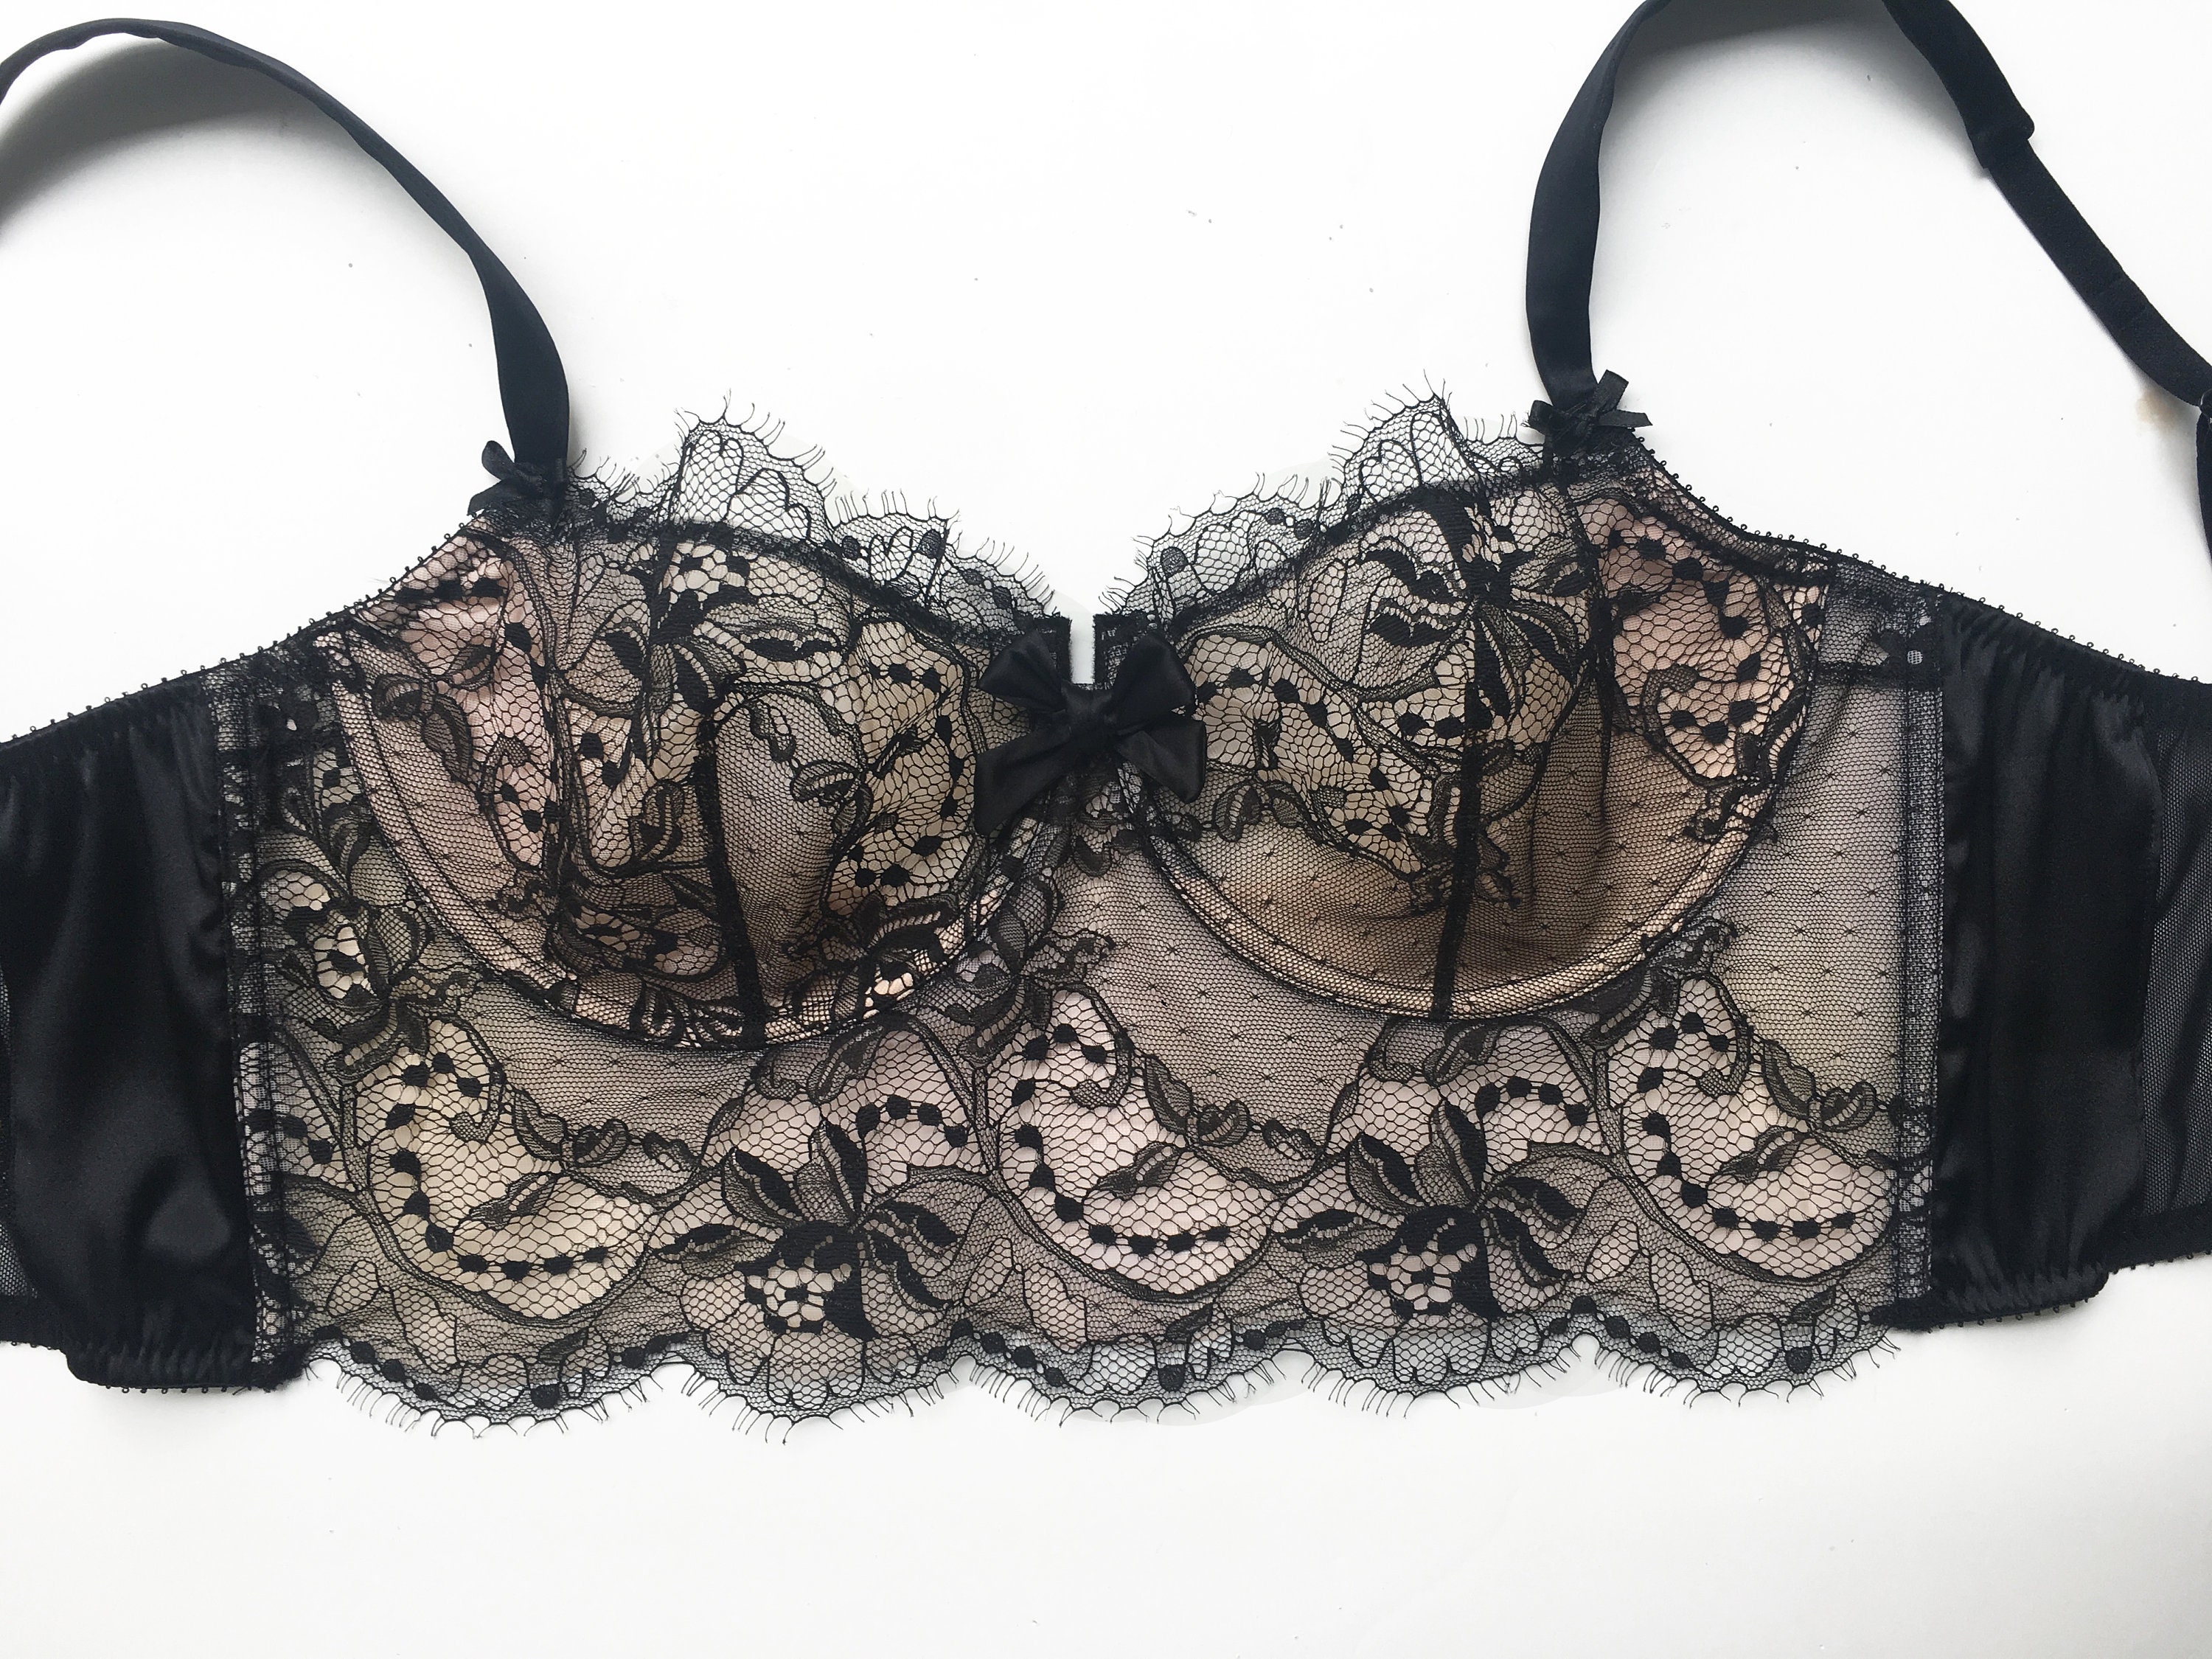 Buy Lace Longline Bra in Black French Chantilly Lace, Satin Silk and Nude  Lining Online in India 